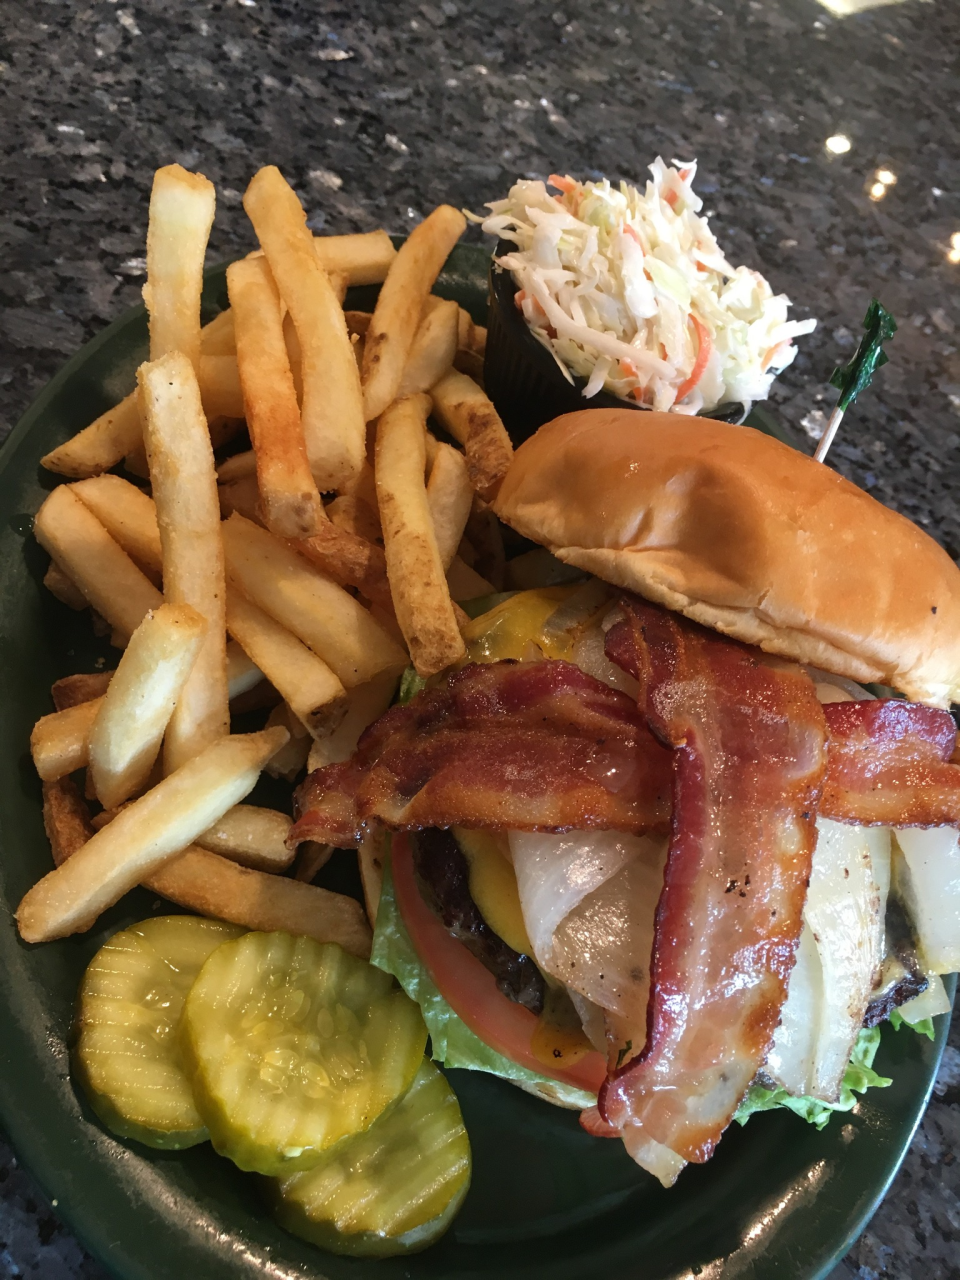 Dig into the Cabin Burger at The Cabin Restaurant.